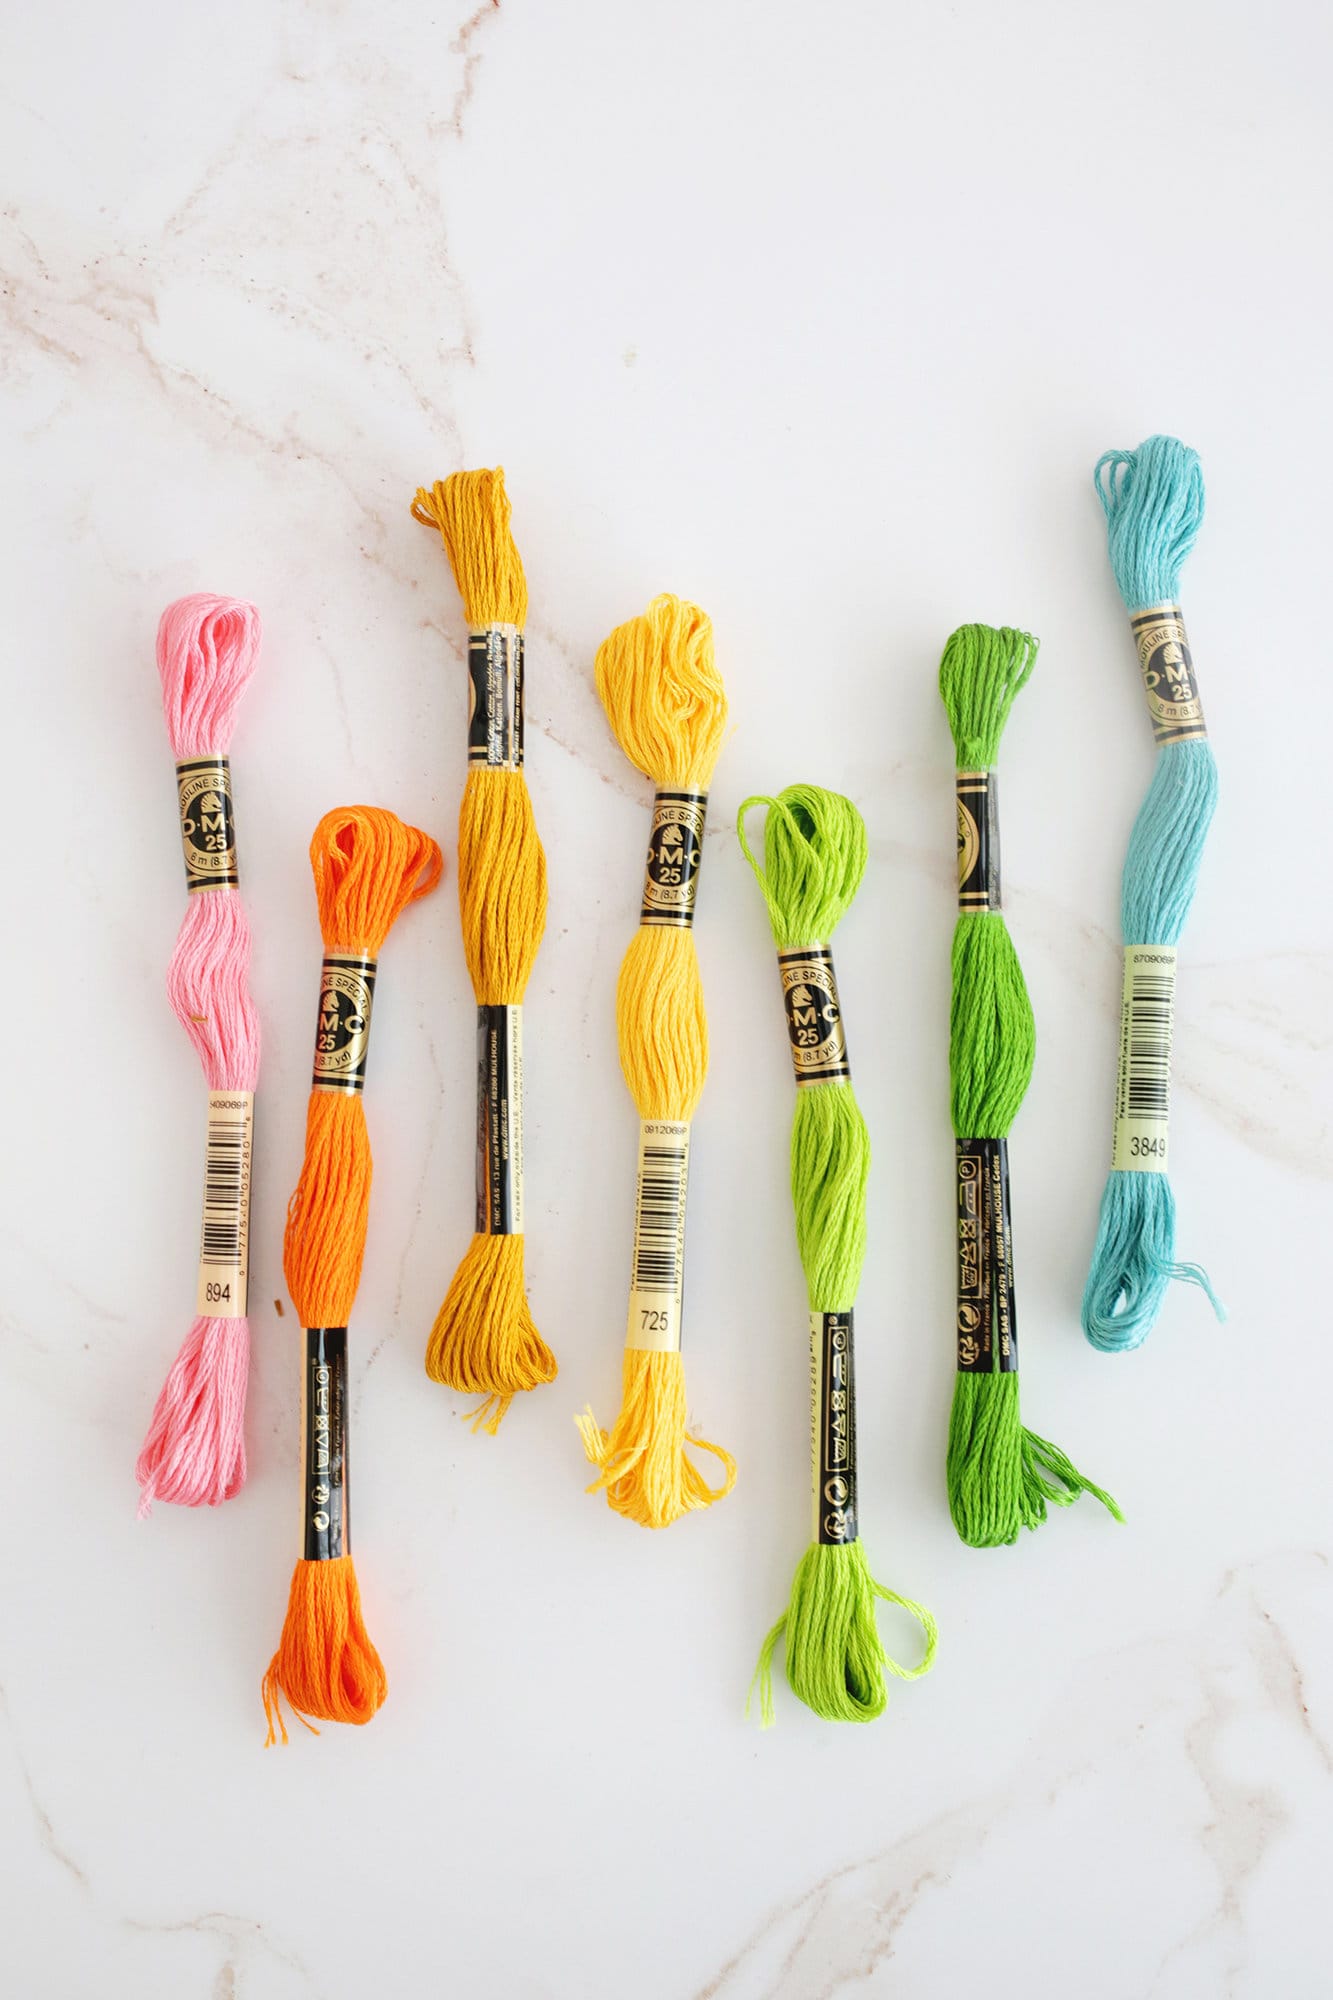 embroidery floss for friendship bracelets